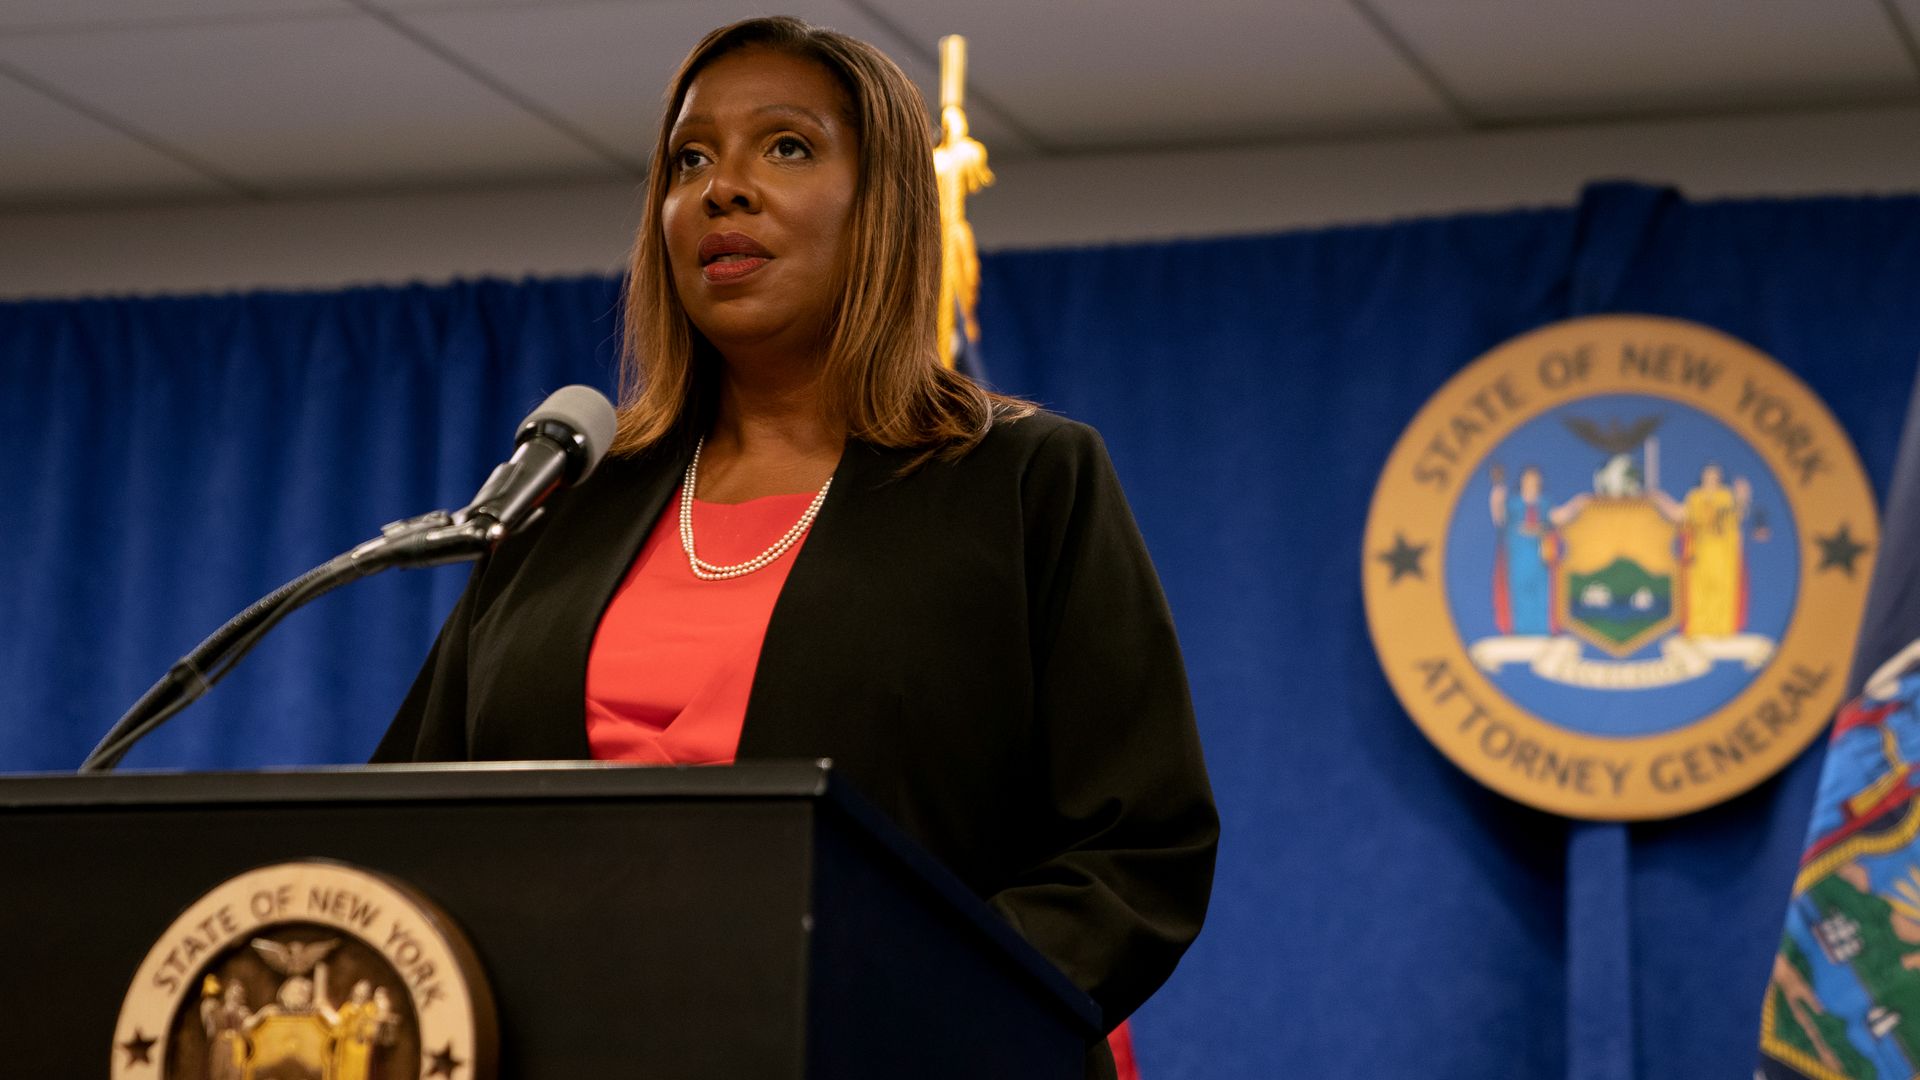 New York Attorney General Letitia James speaking during a press conference in New York City in August 2021.